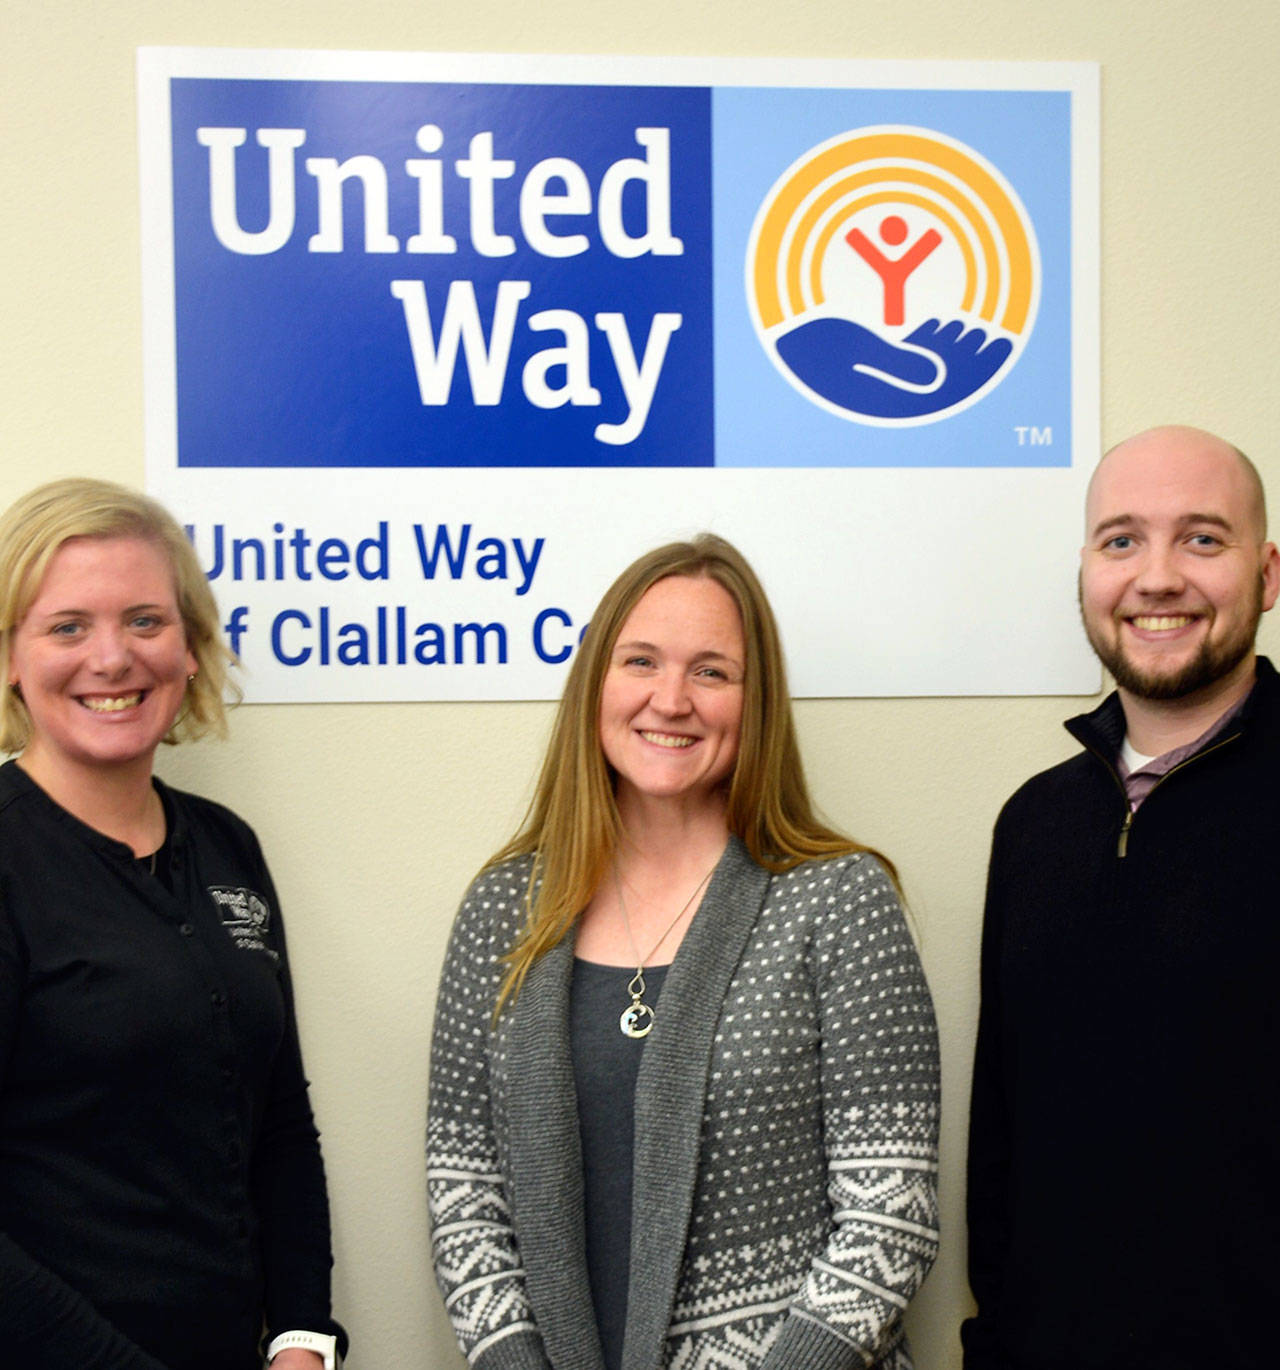 New tenants at Lincoln Center, left to right, Christy Smith, CEO of United Way of Clallam County with resource development managers Carmen Geyer and Travis Simmons. (Jennifer Sperline/Port Angeles School District)